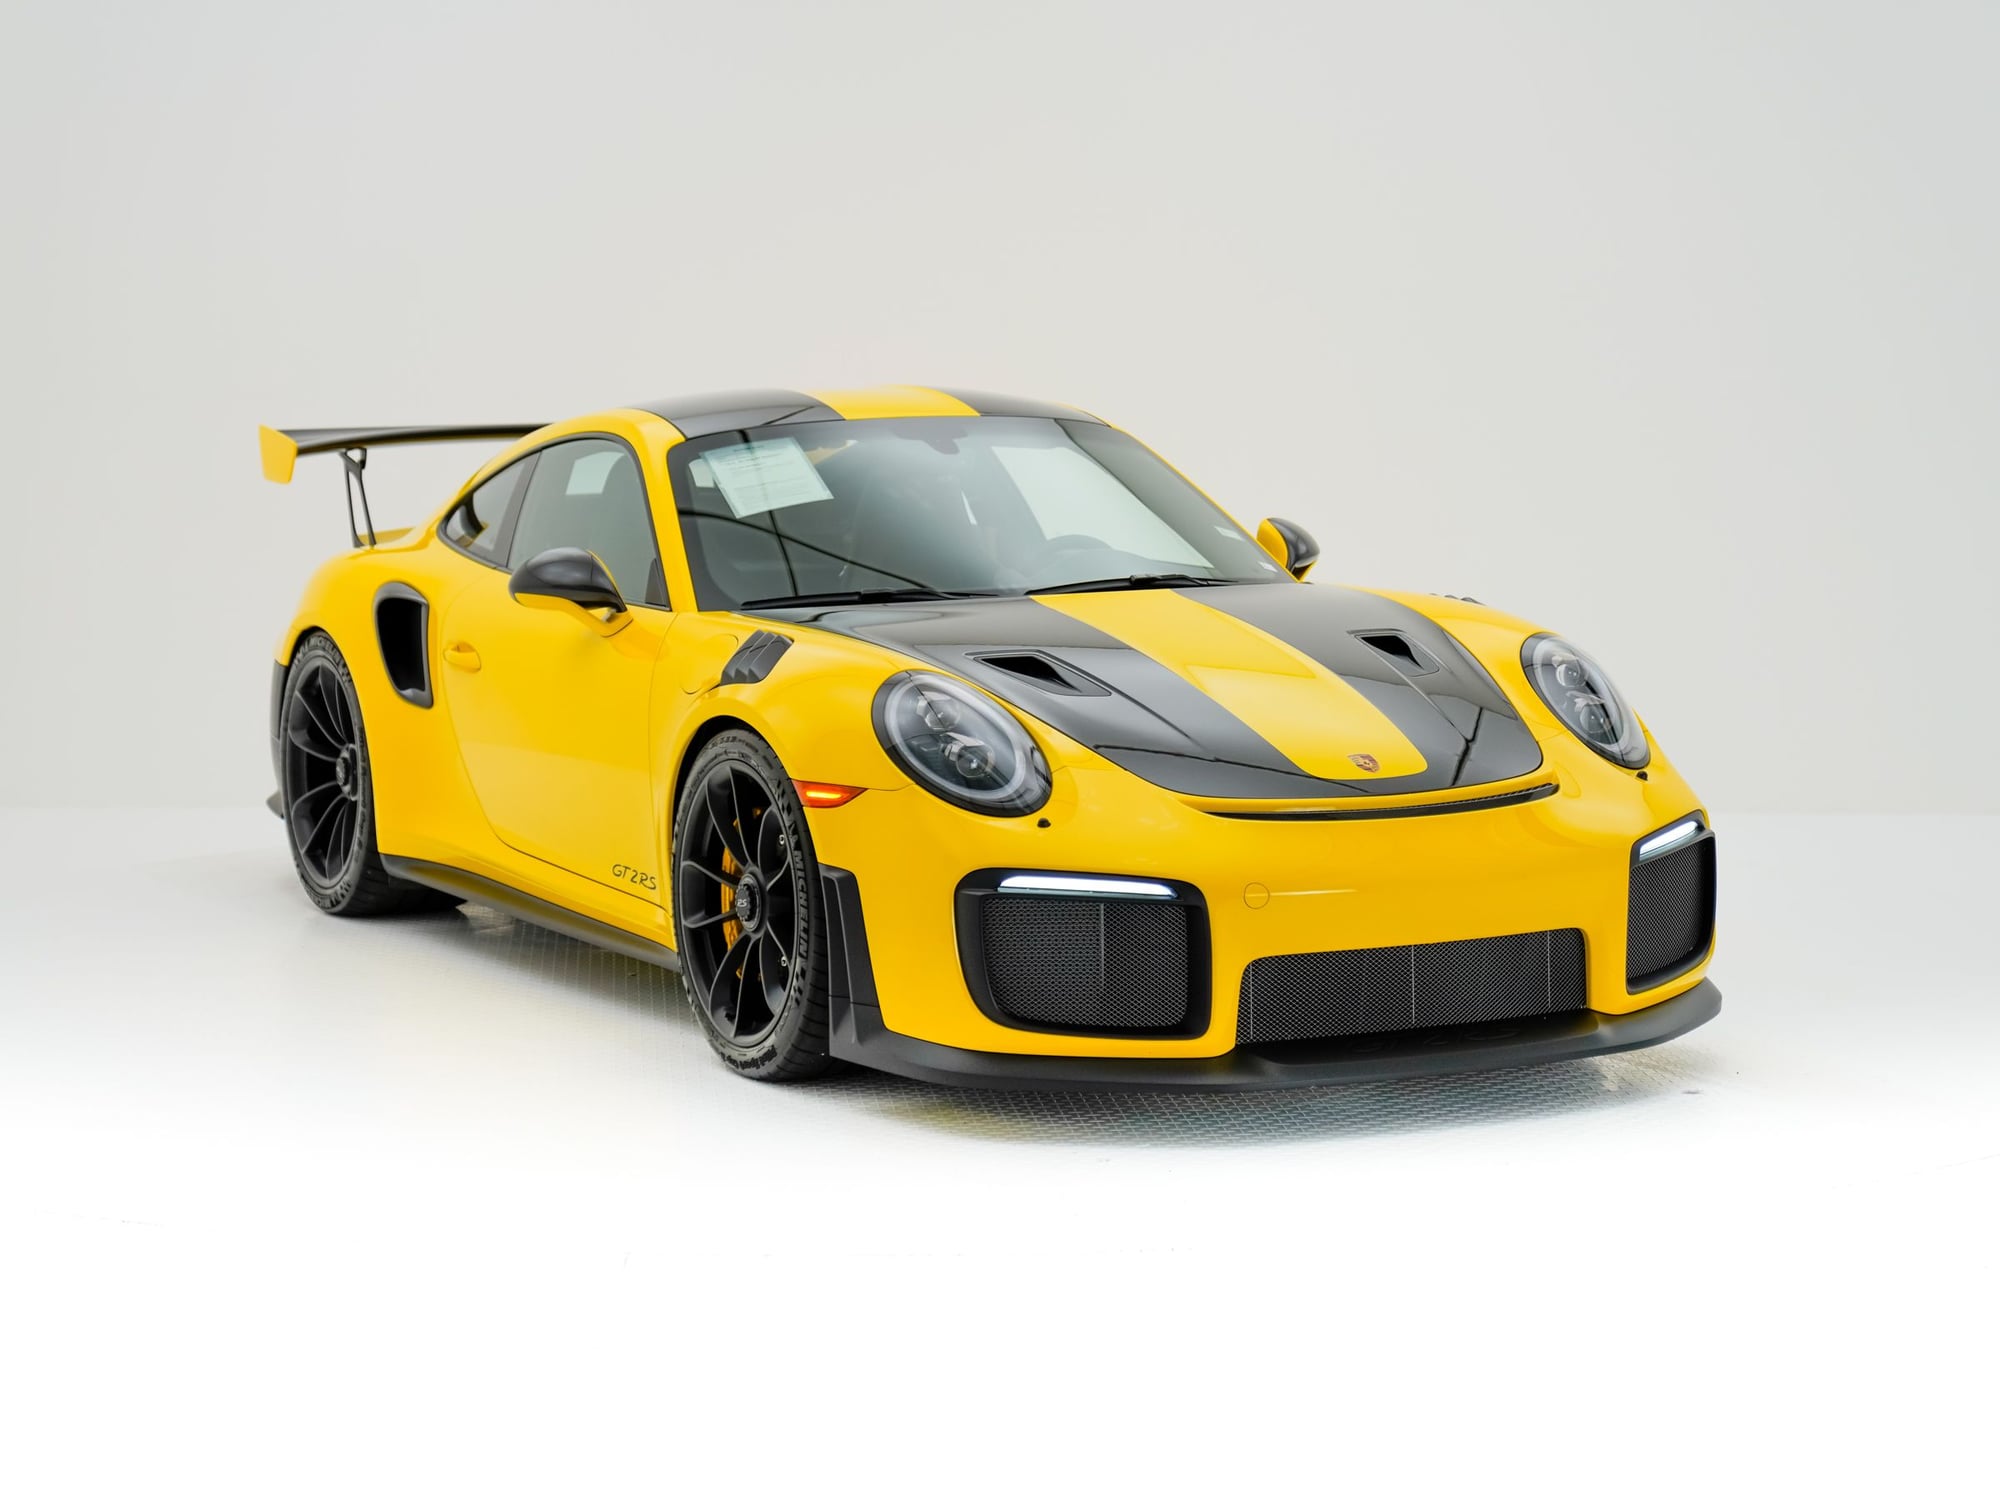 2018 Porsche GT2 - Dealer Inventory: 2018 Porsche 911 GT2 RS - Used - VIN WP0AE2A9XJS186084 - 1,250 Miles - 6 cyl - 2WD - Automatic - Coupe - Yellow - Beaverton, OR 97005, United States